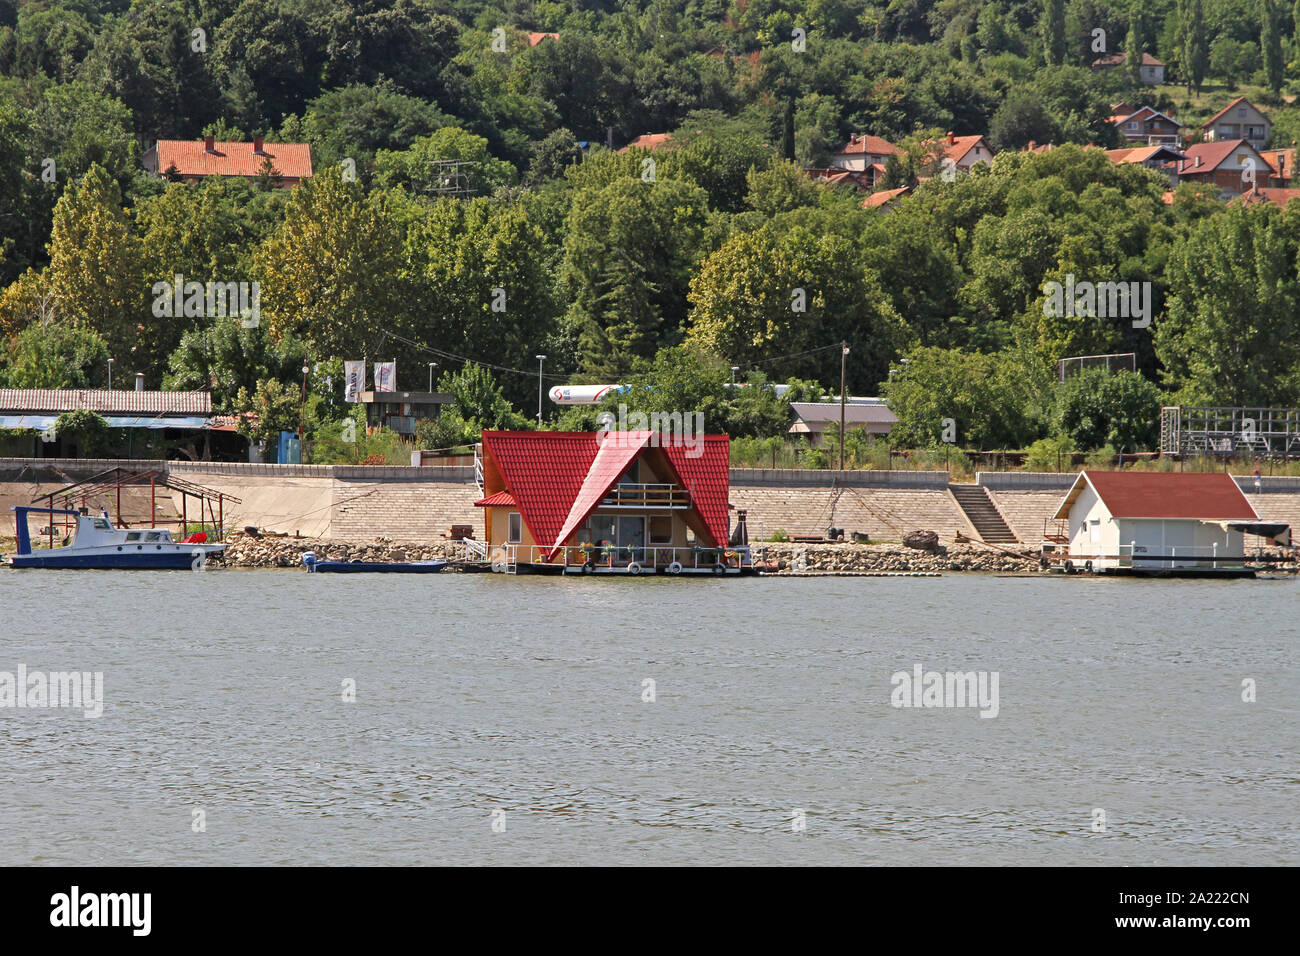 Townhouses on the Danube River Bank, Panchevo, Serbia. Stock Photo